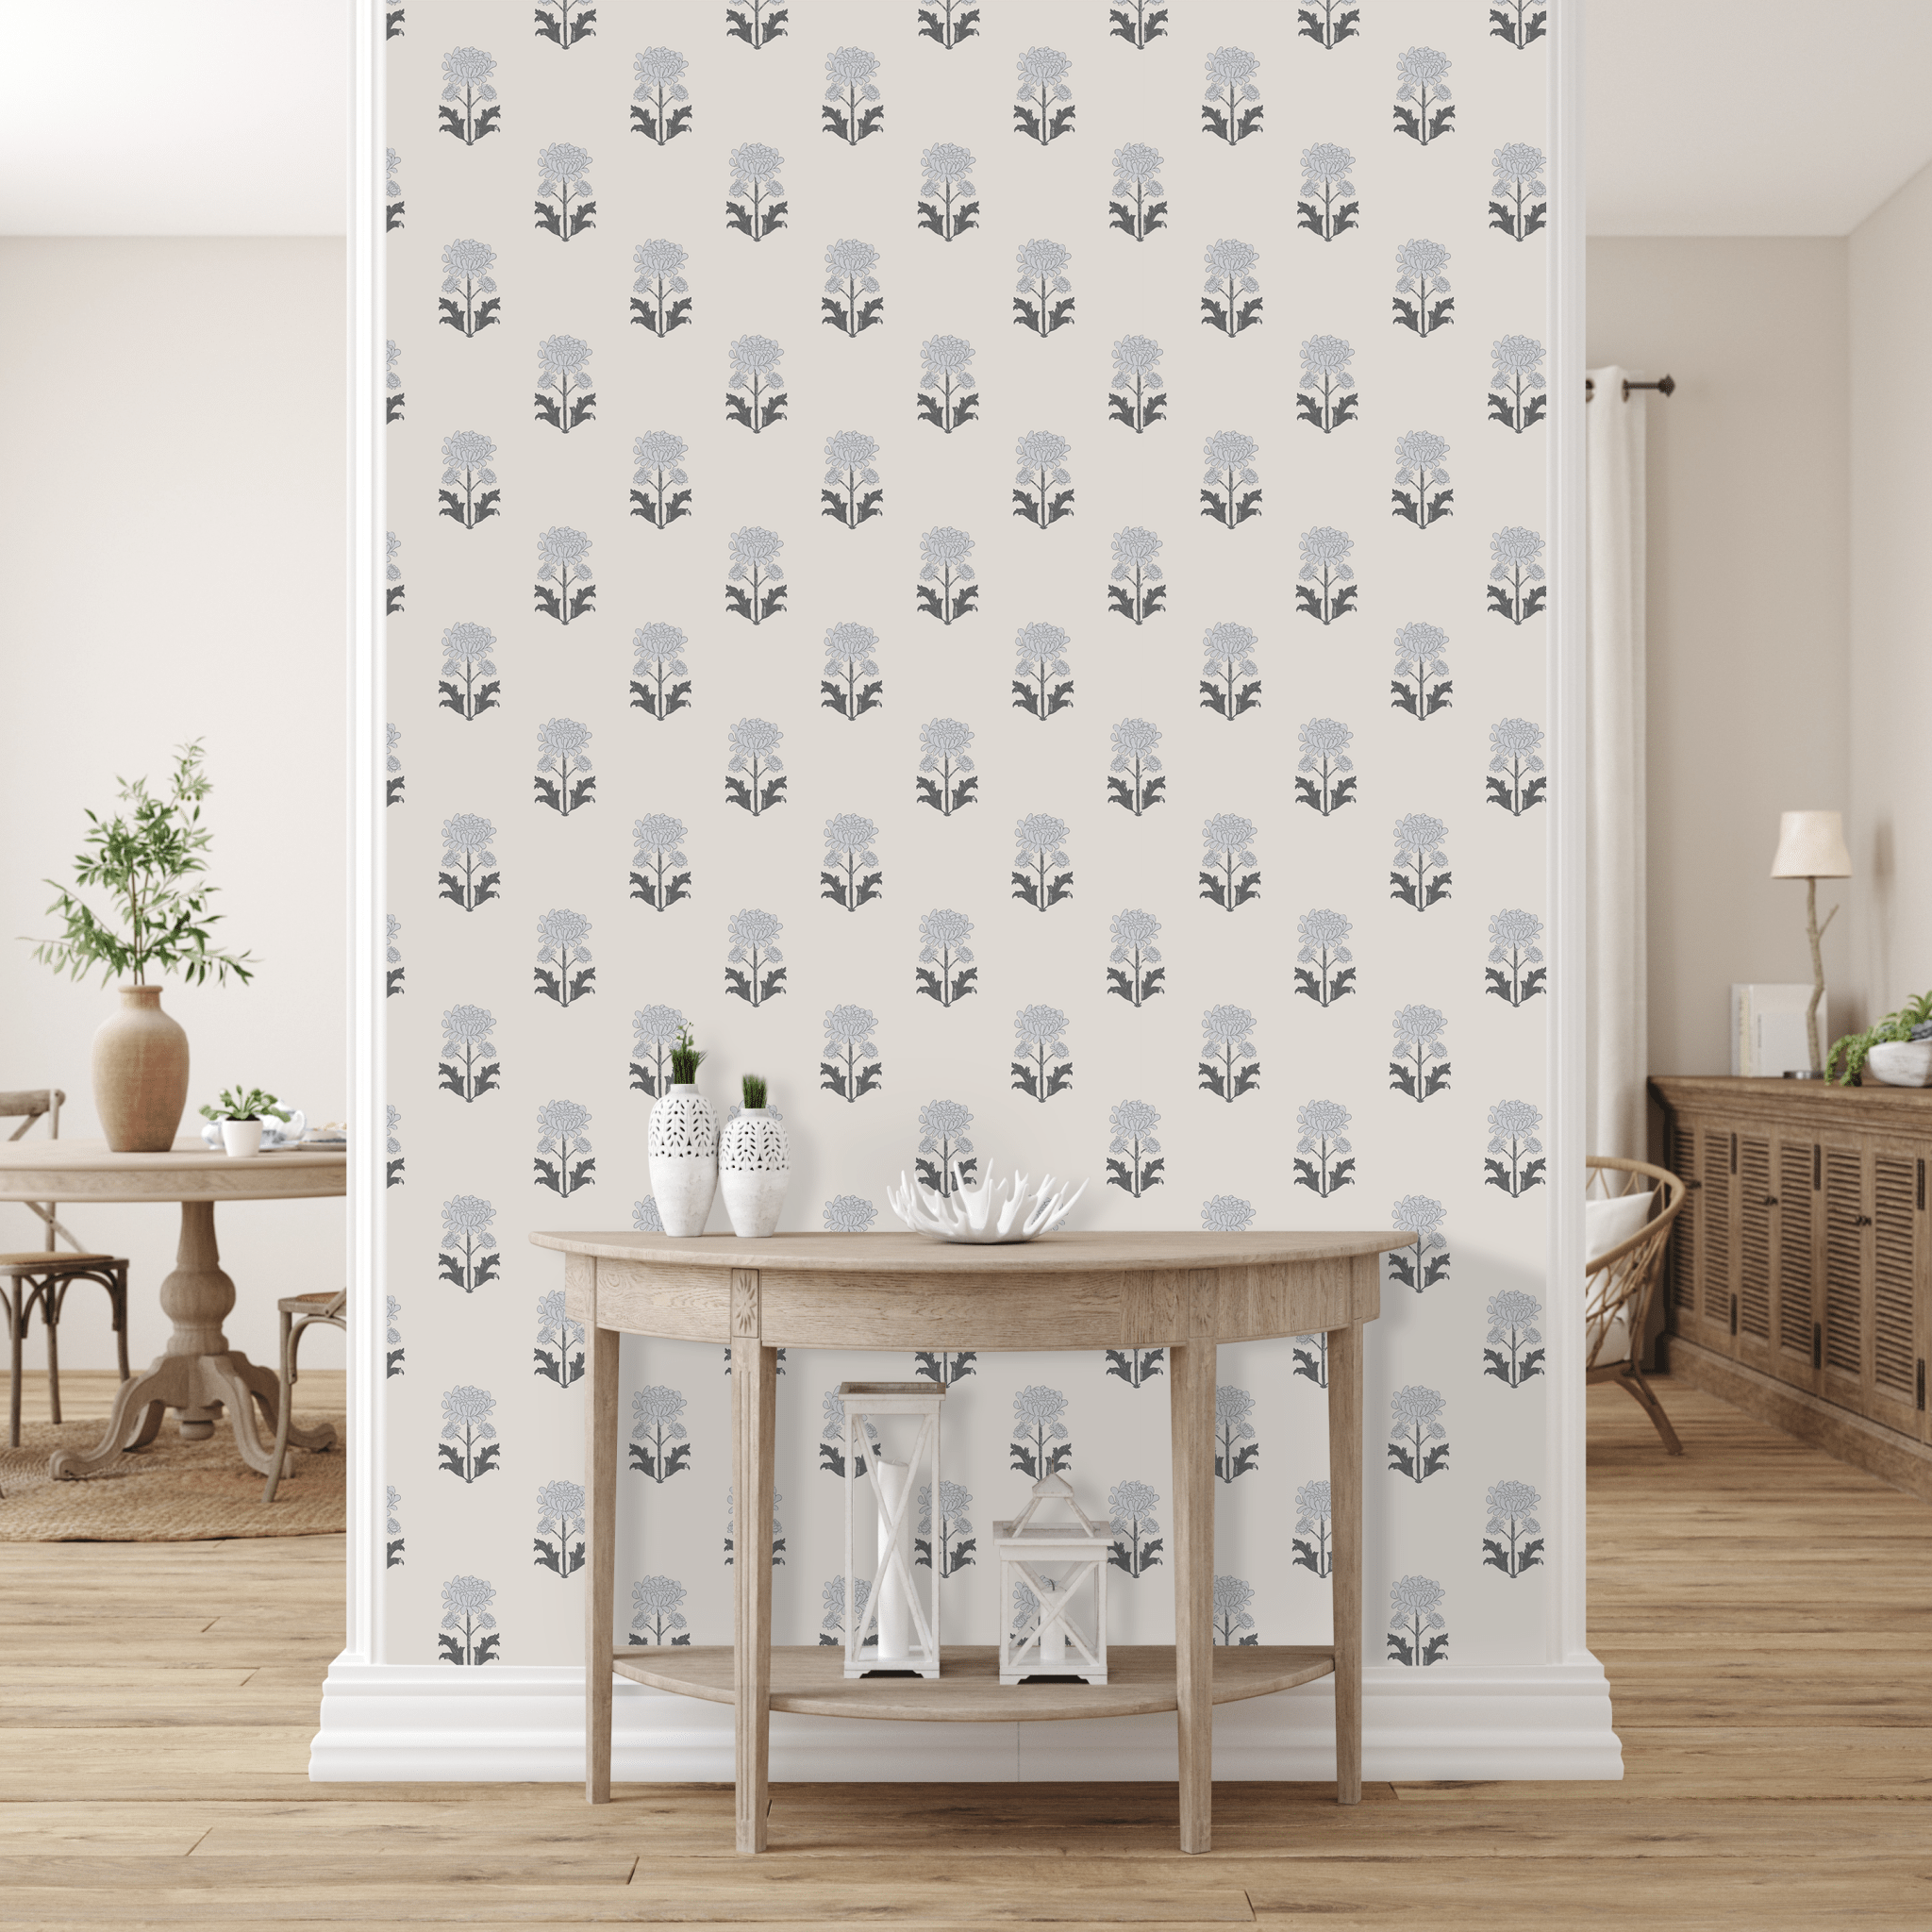 A stylish room with a wall covered in floral blueprint peel and stick removable wallpaper. A wooden table with white vases and a coral piece sits in front, and a dining area is subtly visible in the background